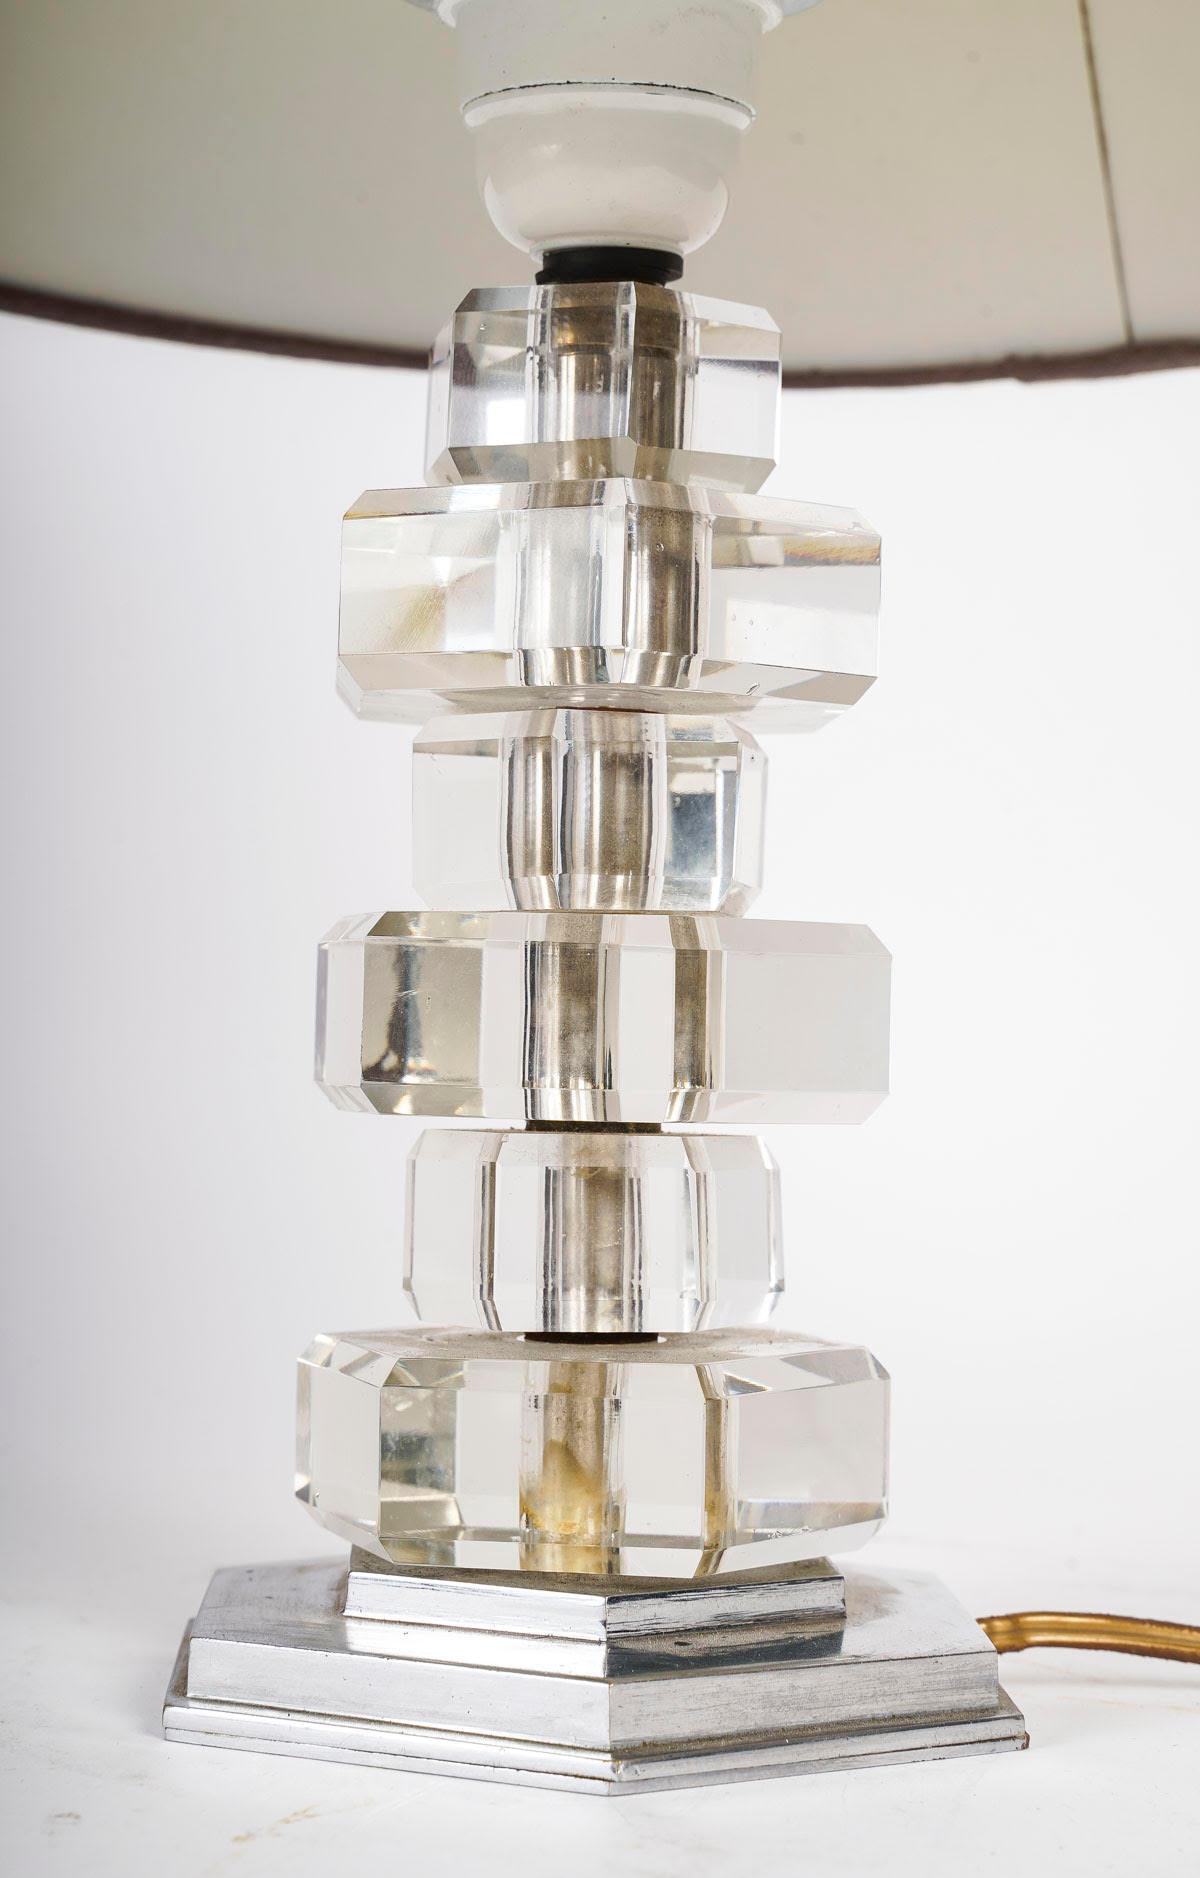 Table lamp by the artist Henri Morand, 1940, Modernist style.

Table lamp in chromed metal and glass blocks, design by the artist Henri Morand, circa 1940, Modernist style.
h: 36cm, d: 29cm